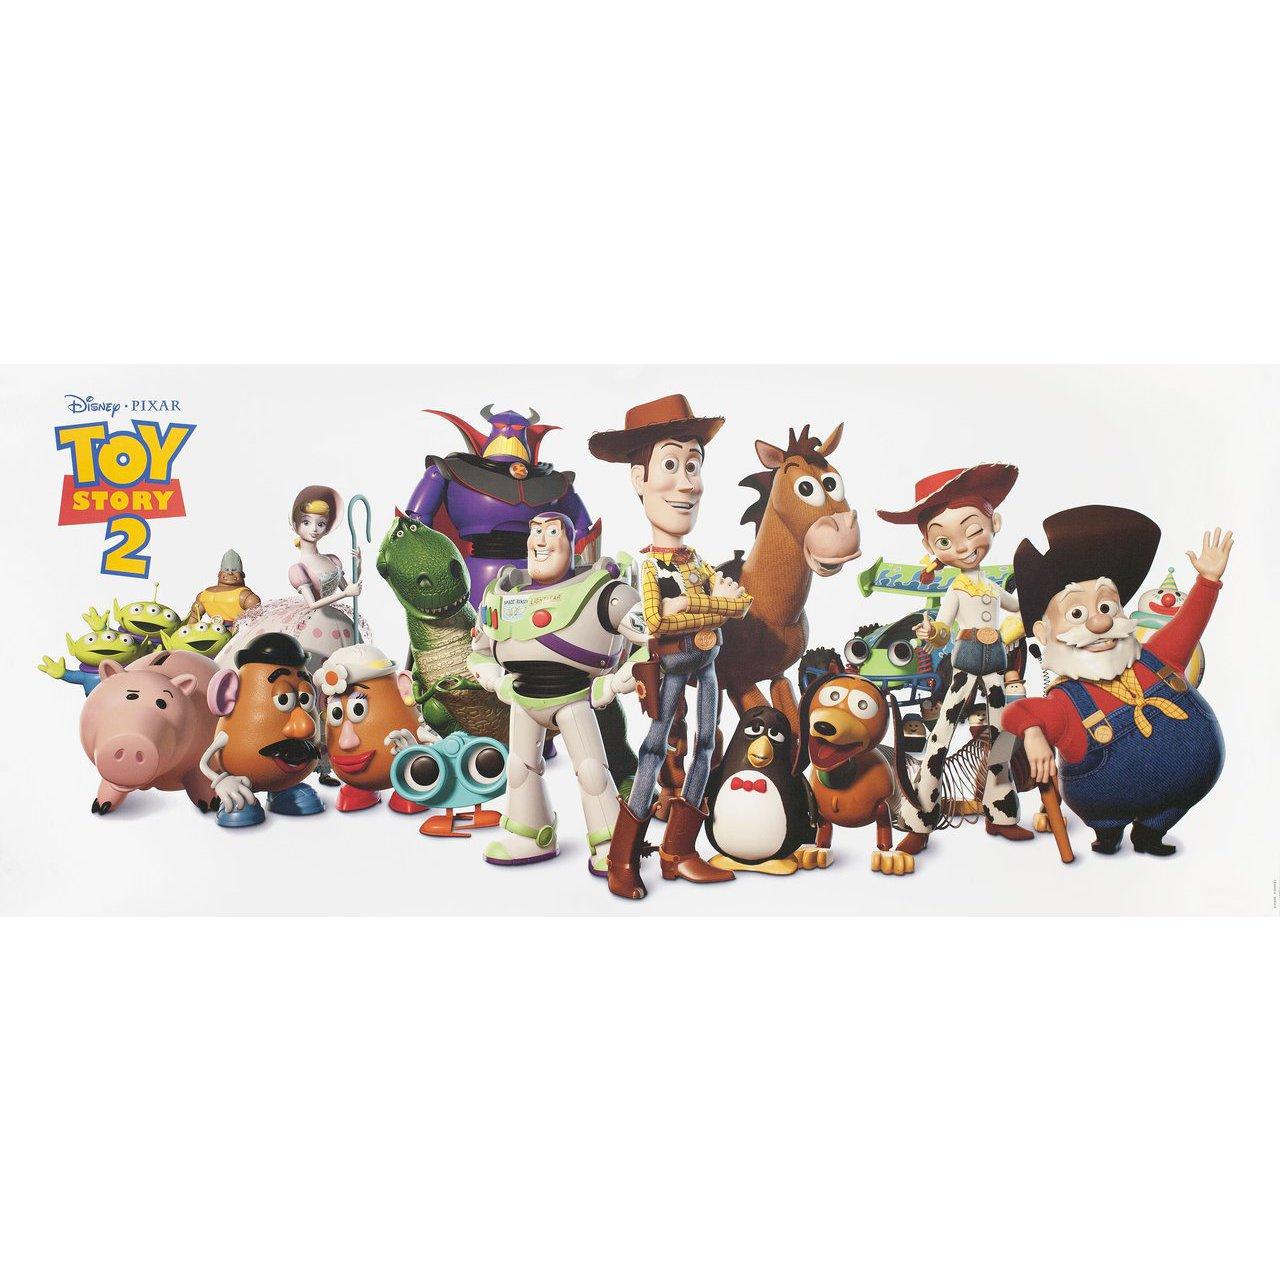 Original 1999 U.S. poster for the film Toy Story 2 directed by John Lasseter / Ash Brannon / Lee Unkrich with Tom Hanks / Tim Allen / Joan Cusack / Kelsey Grammer. Fine condition, rolled. Please note: the size is stated in inches and the actual size